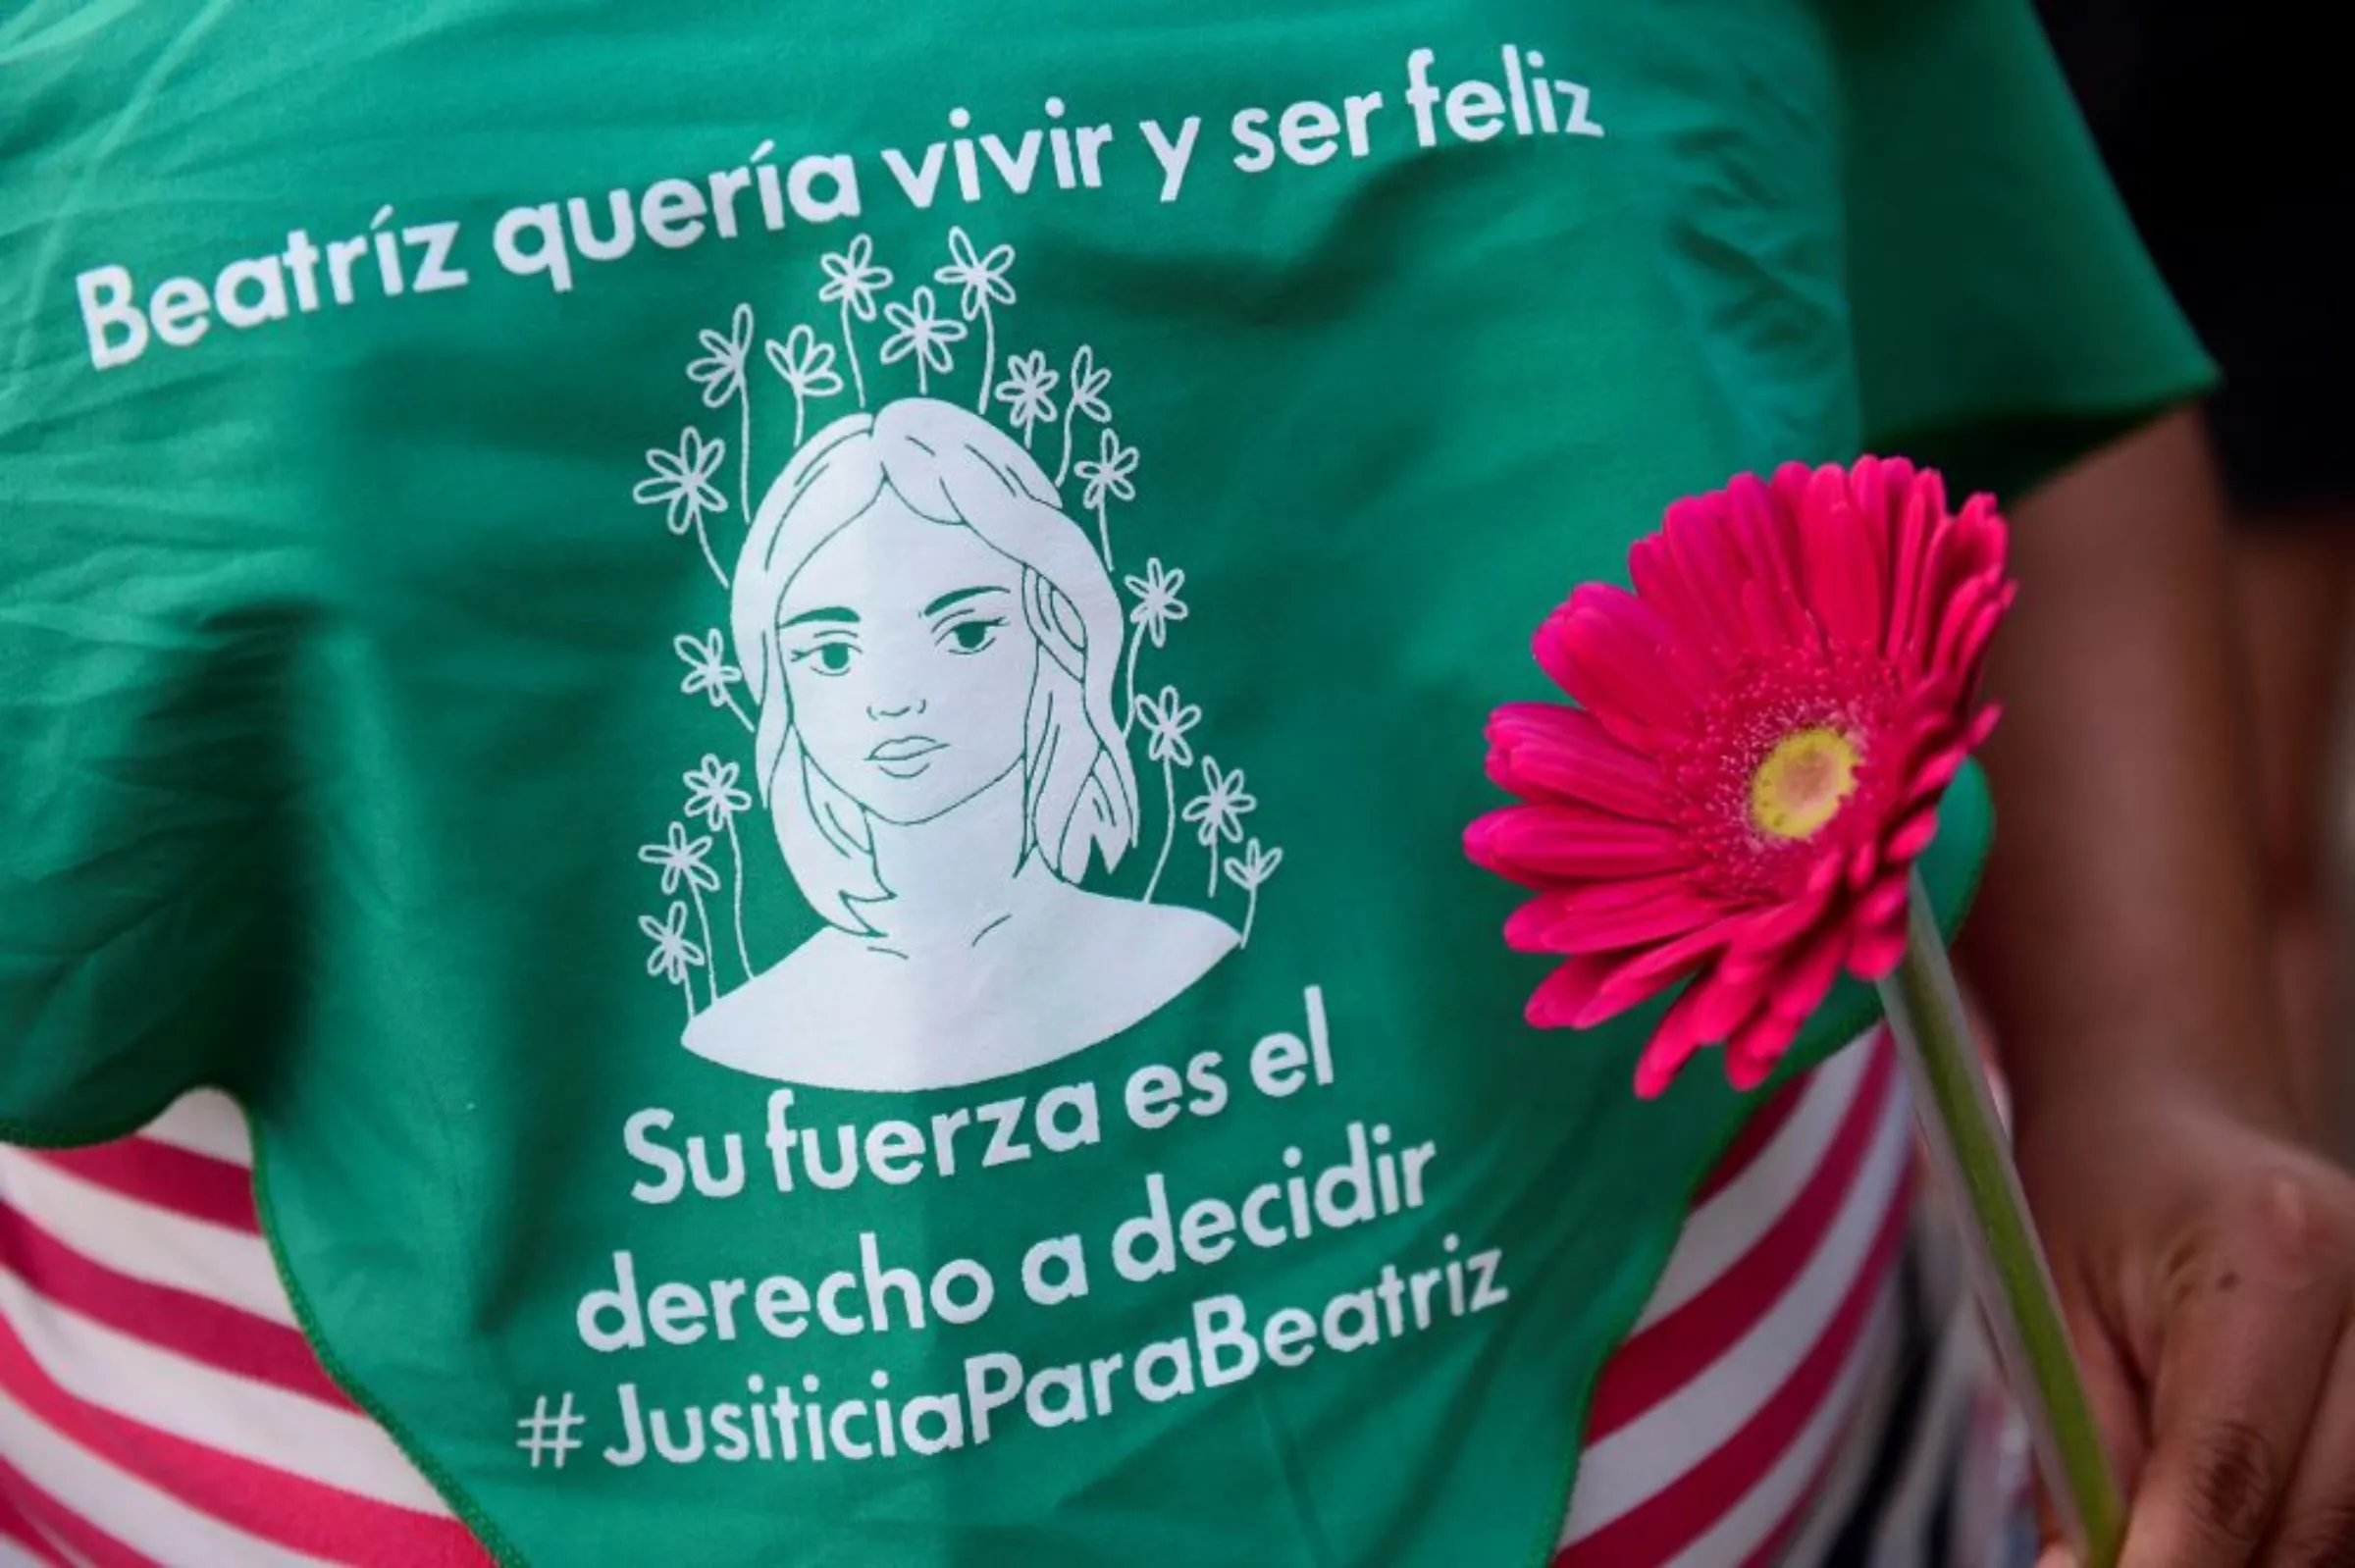 A woman holds a flower near a green handkerchief in memory of Beatriz, a woman who died after El Salvador's supreme court denied her a medical abortion, during a protest in support of abortion rights in San Salvador, El Salvador, October 18, 2022